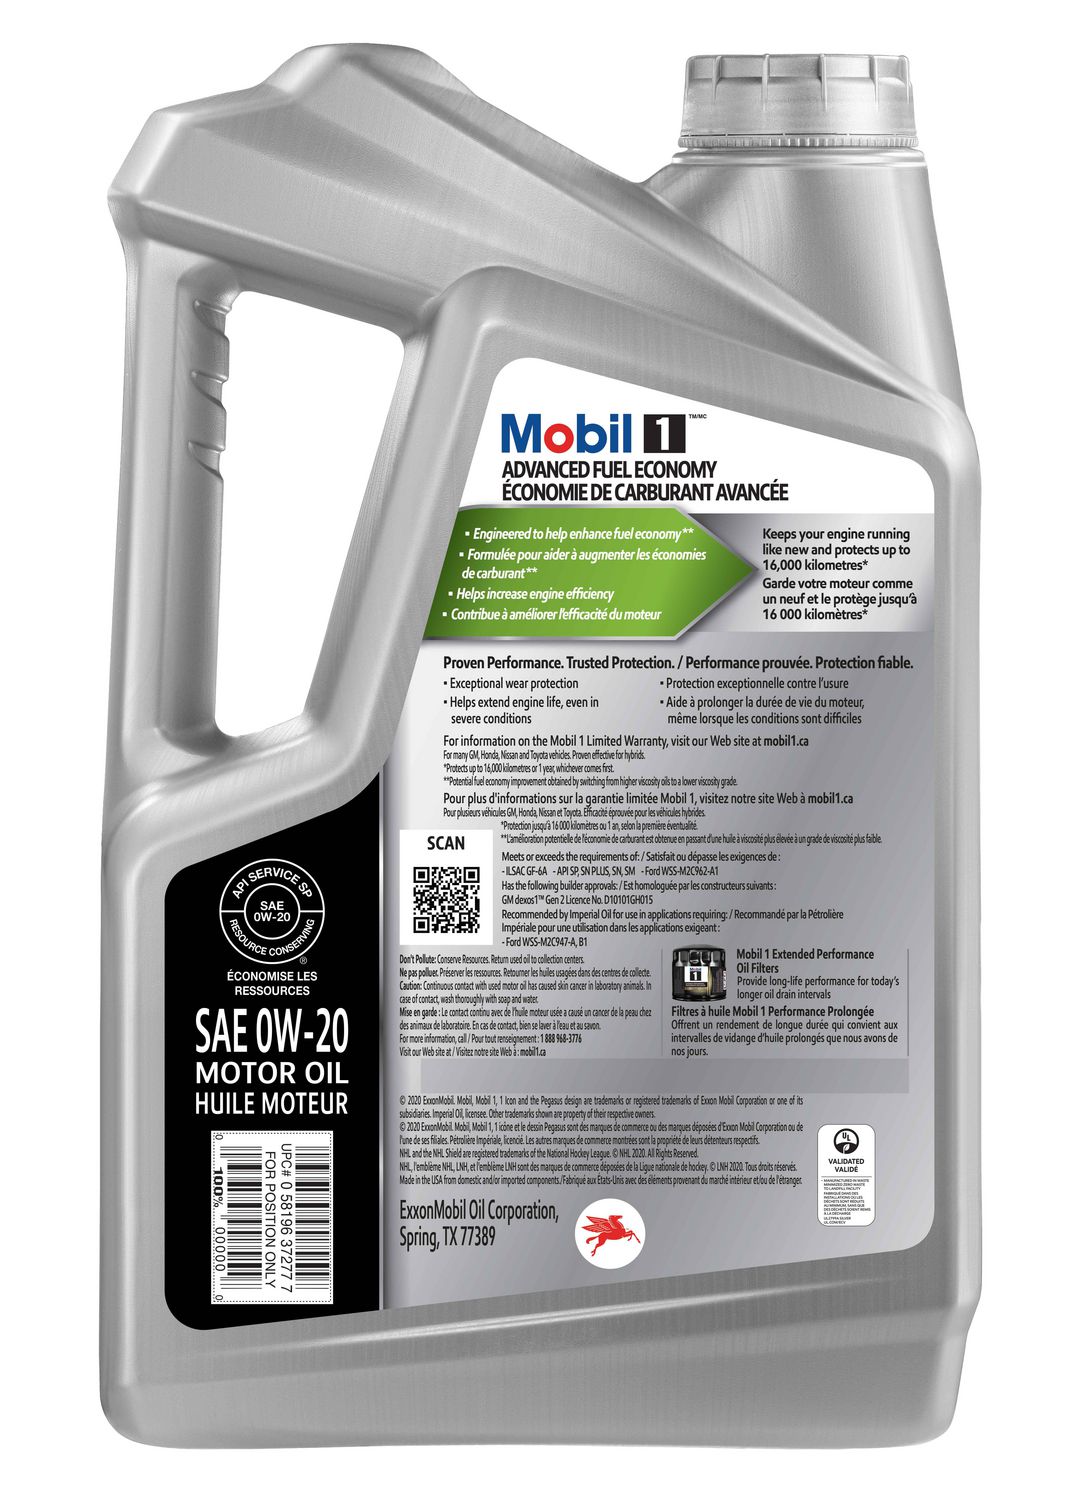 Mobil 1™ Advanced Fuel Economy Full Synthetic Motor Oil 0W-20 